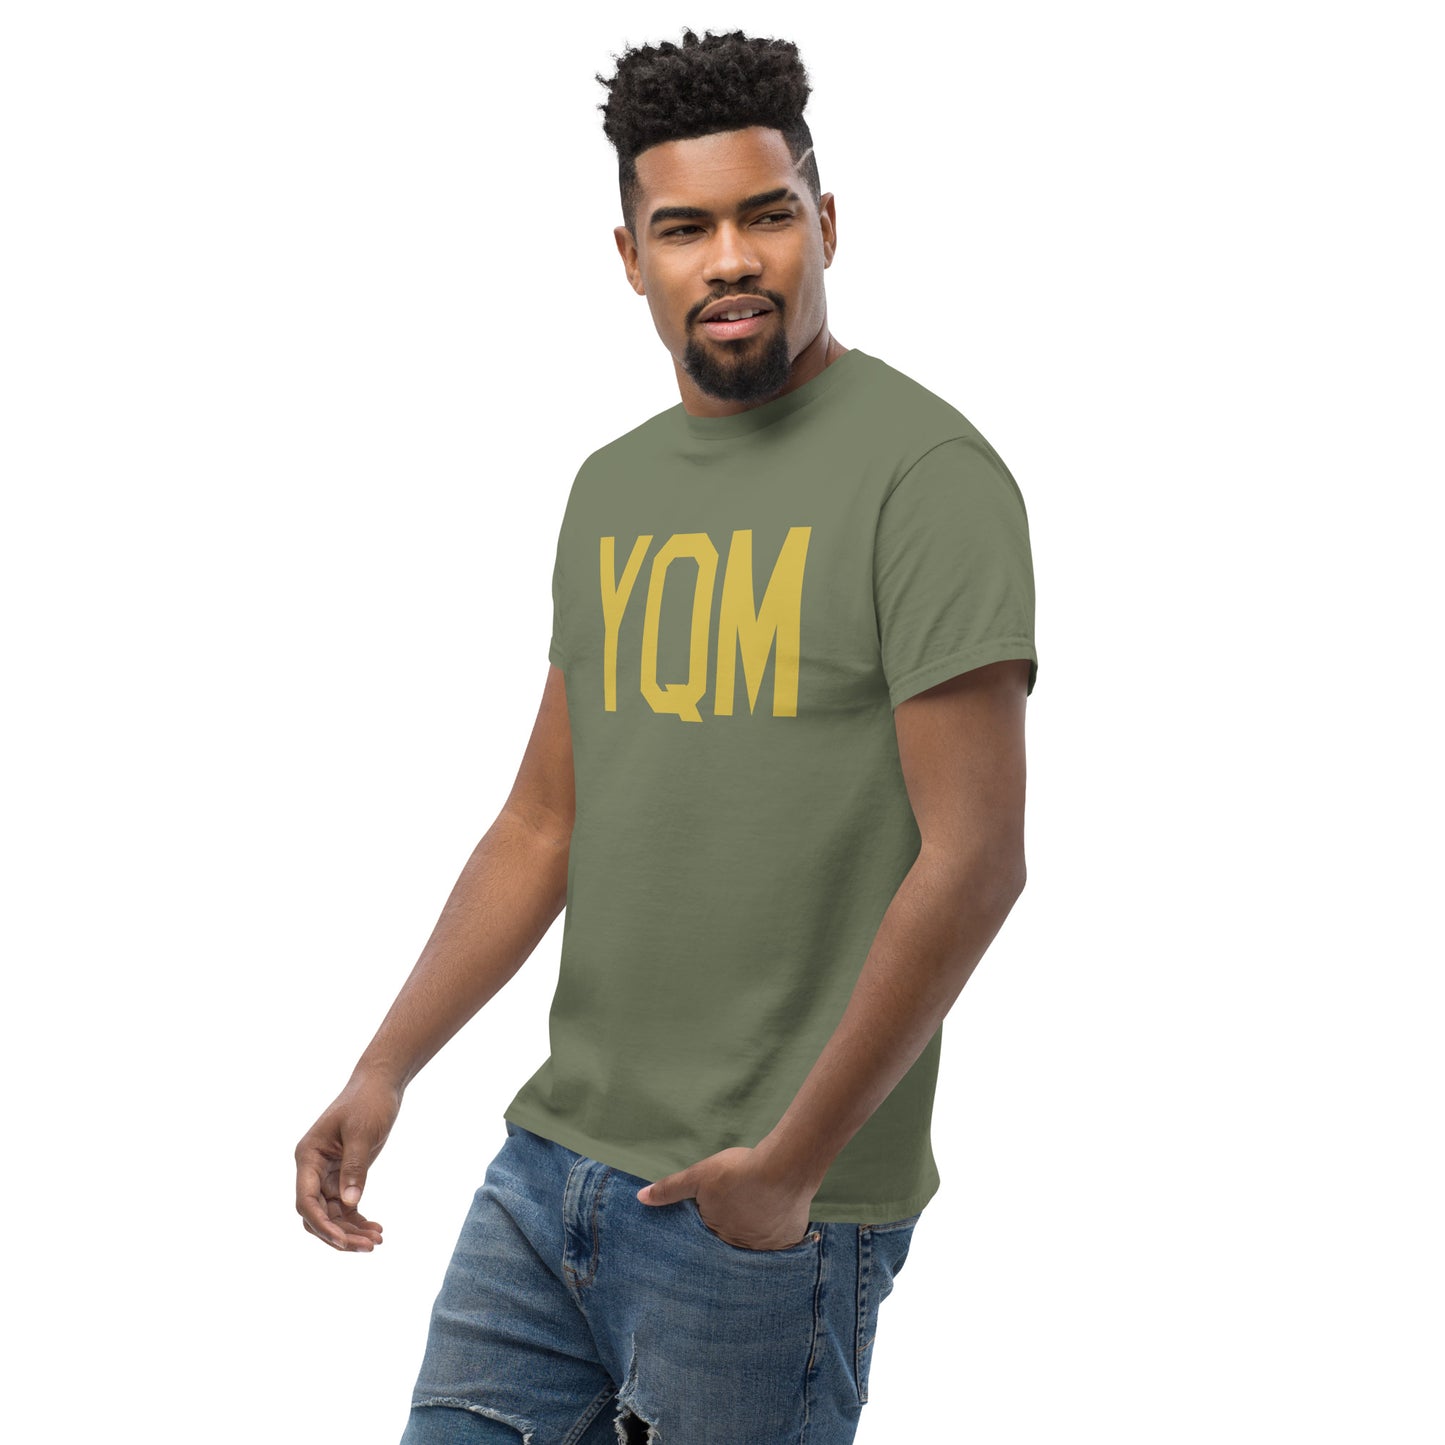 Aviation Enthusiast Men's Tee - Old Gold Graphic • YQM Moncton • YHM Designs - Image 07